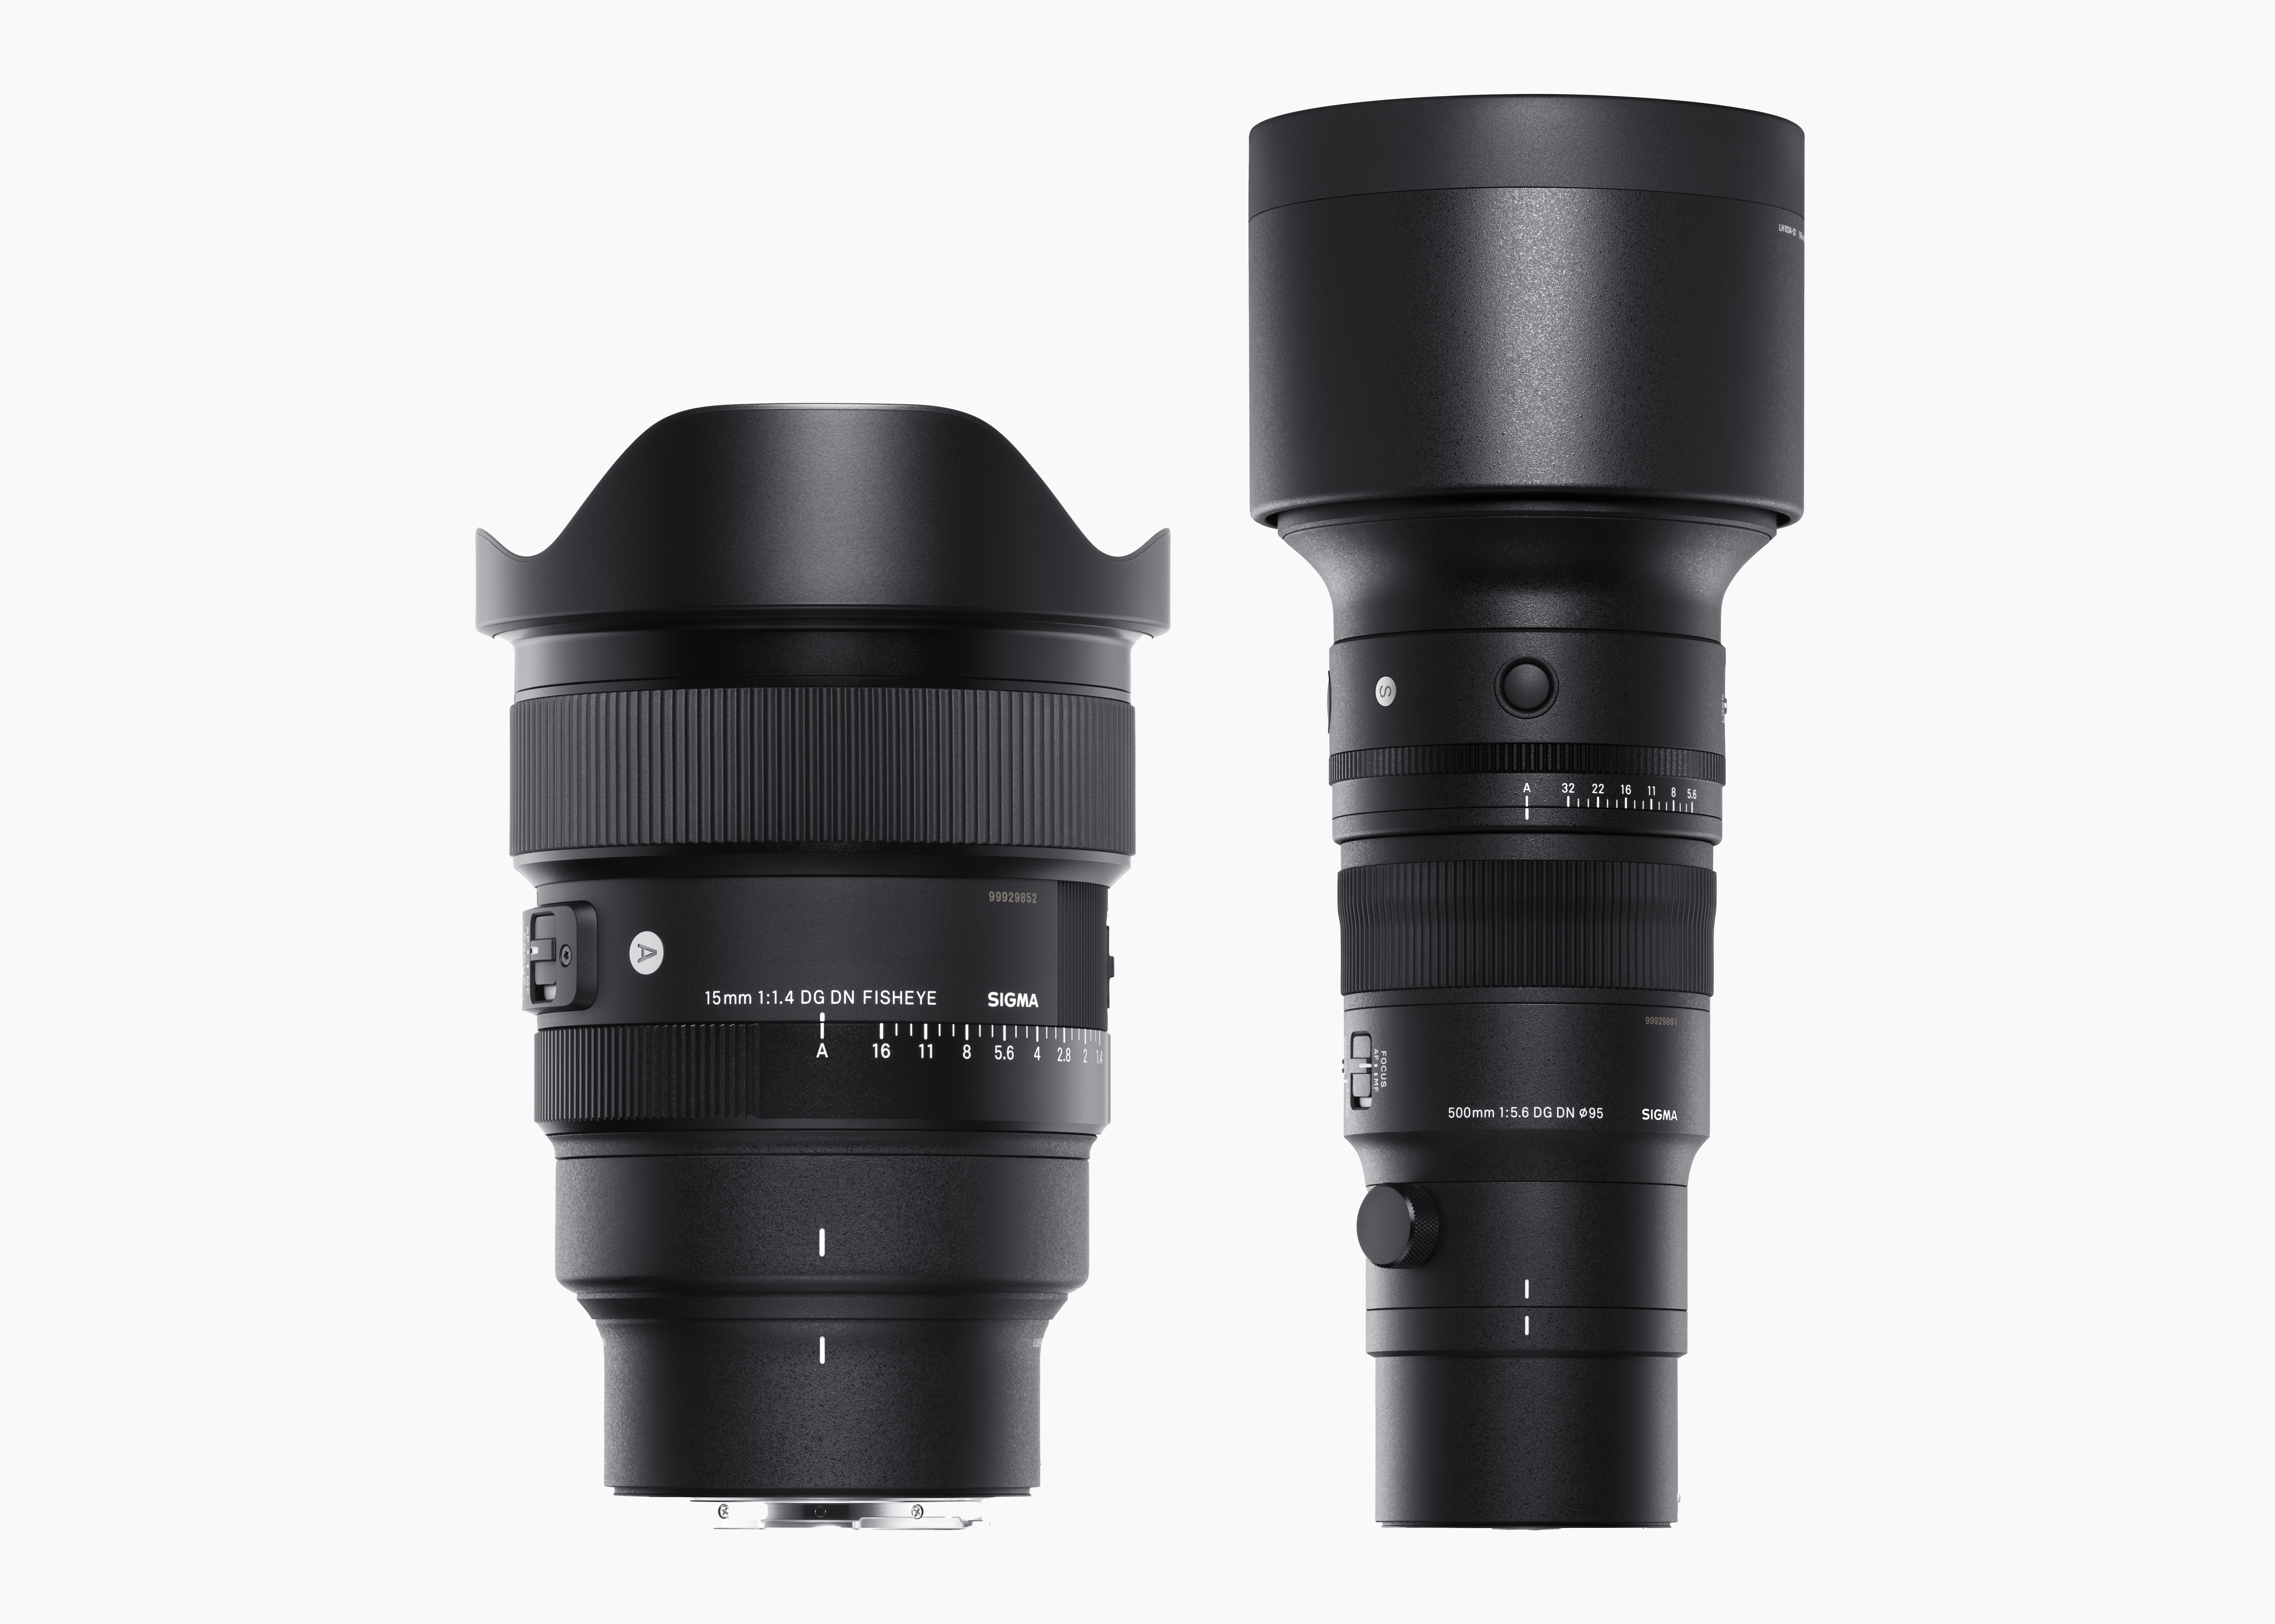 NEW SIGMA 15mm F1.4 DG DN and SIGMA 500mm F5.6 3